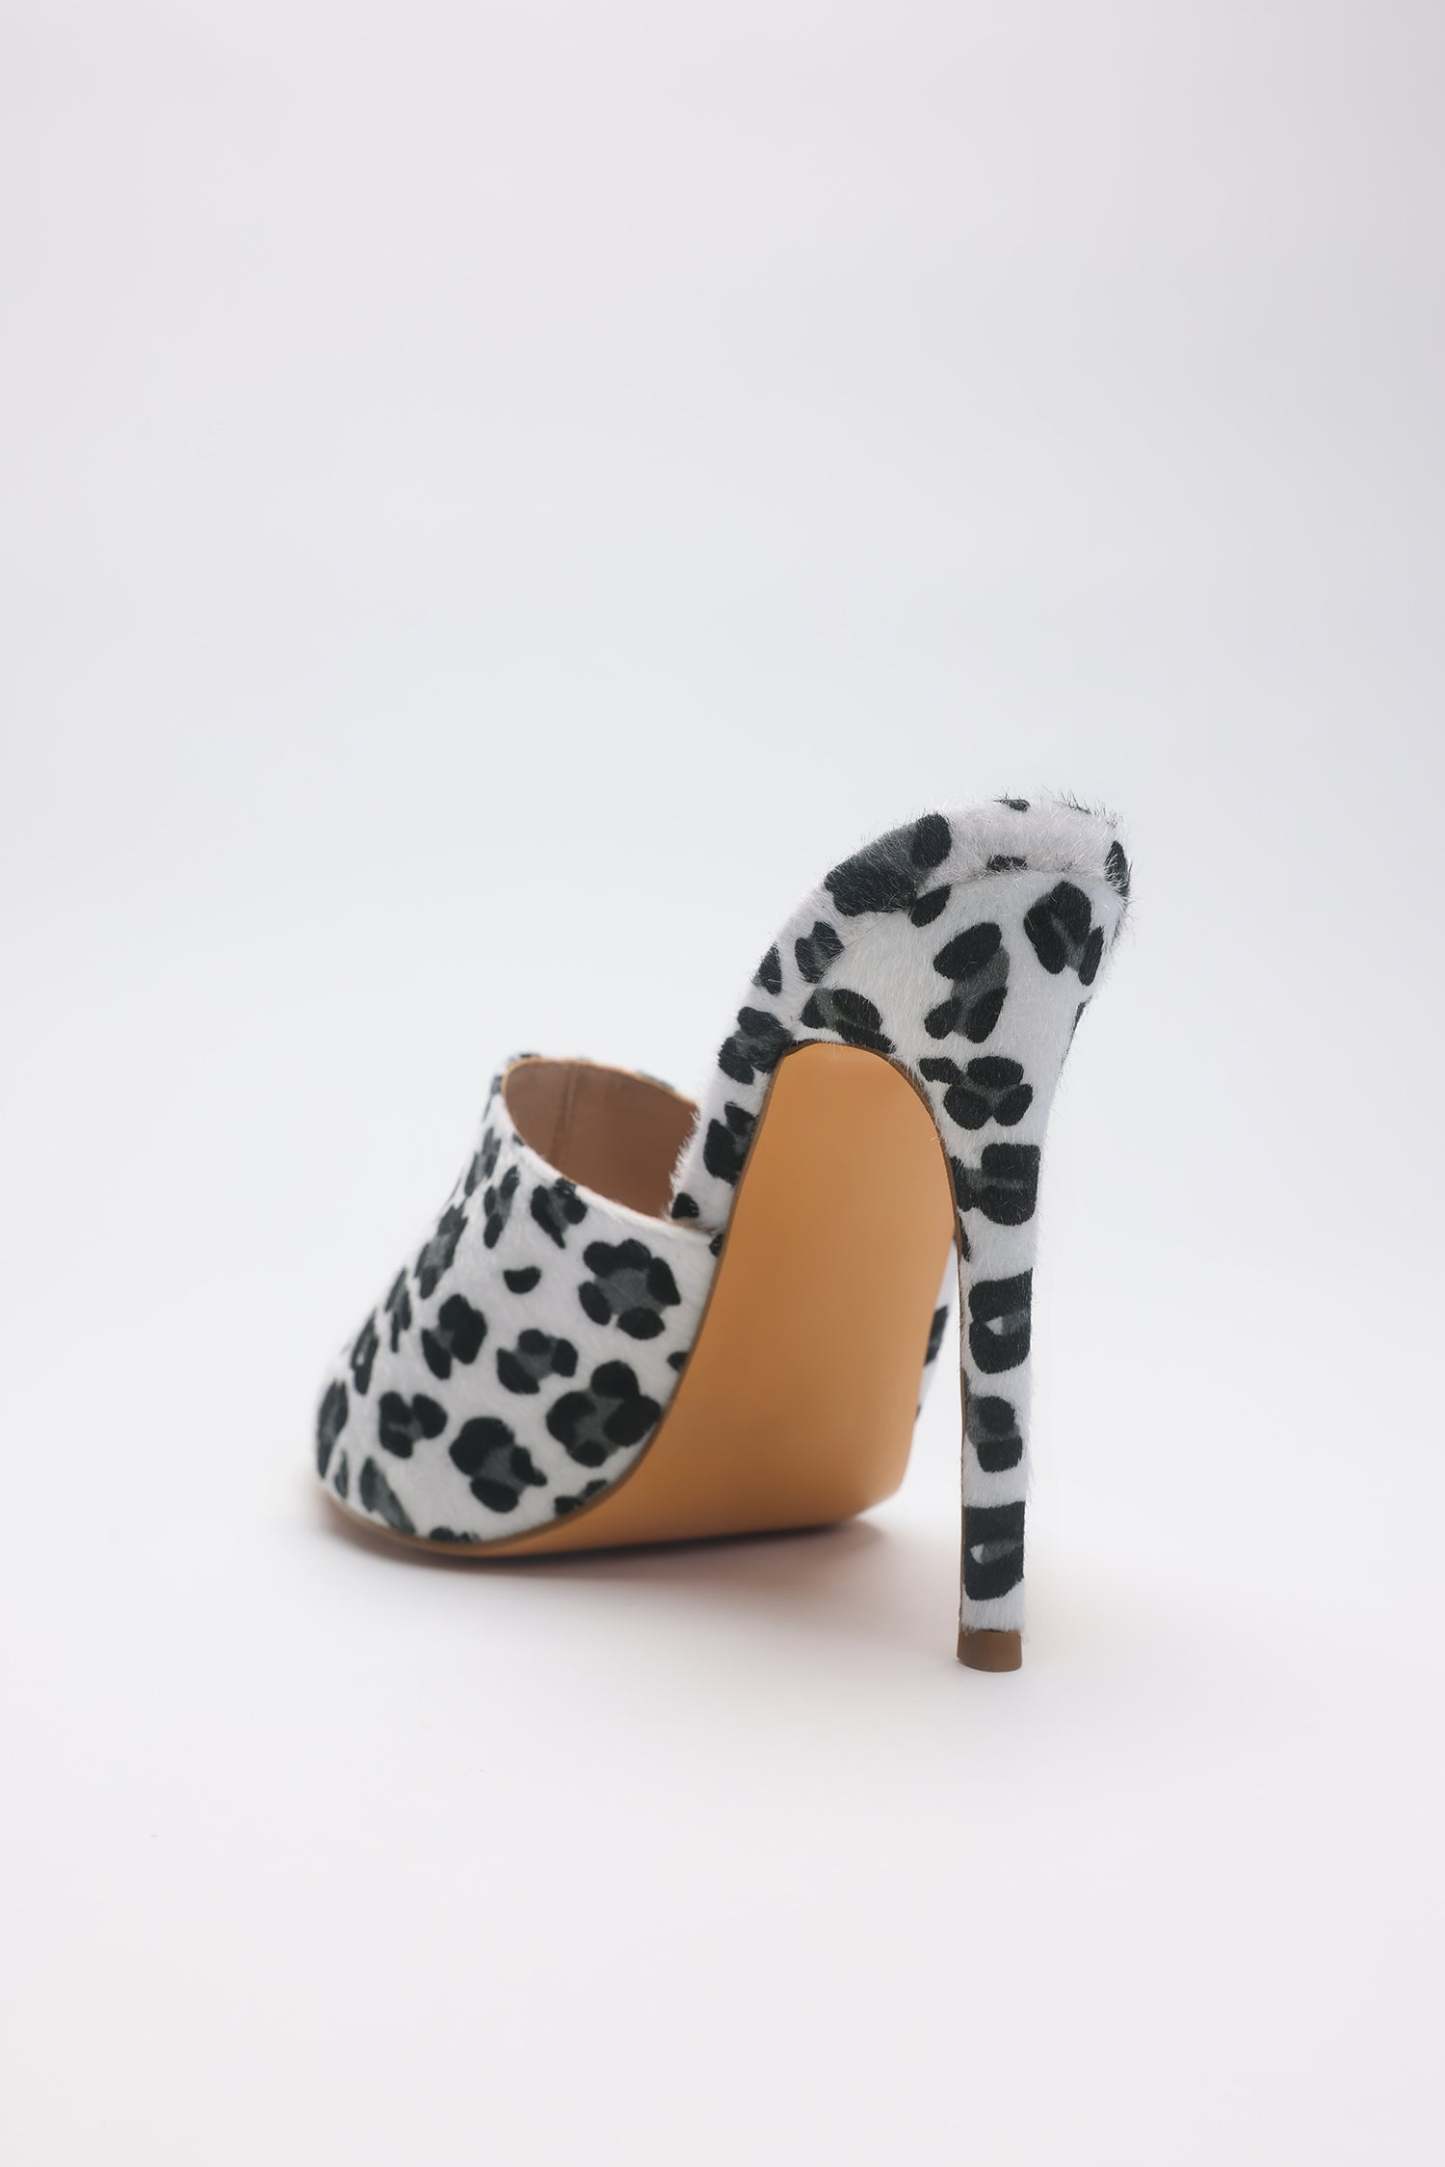 Leopard suede pointed toe high heel slippers